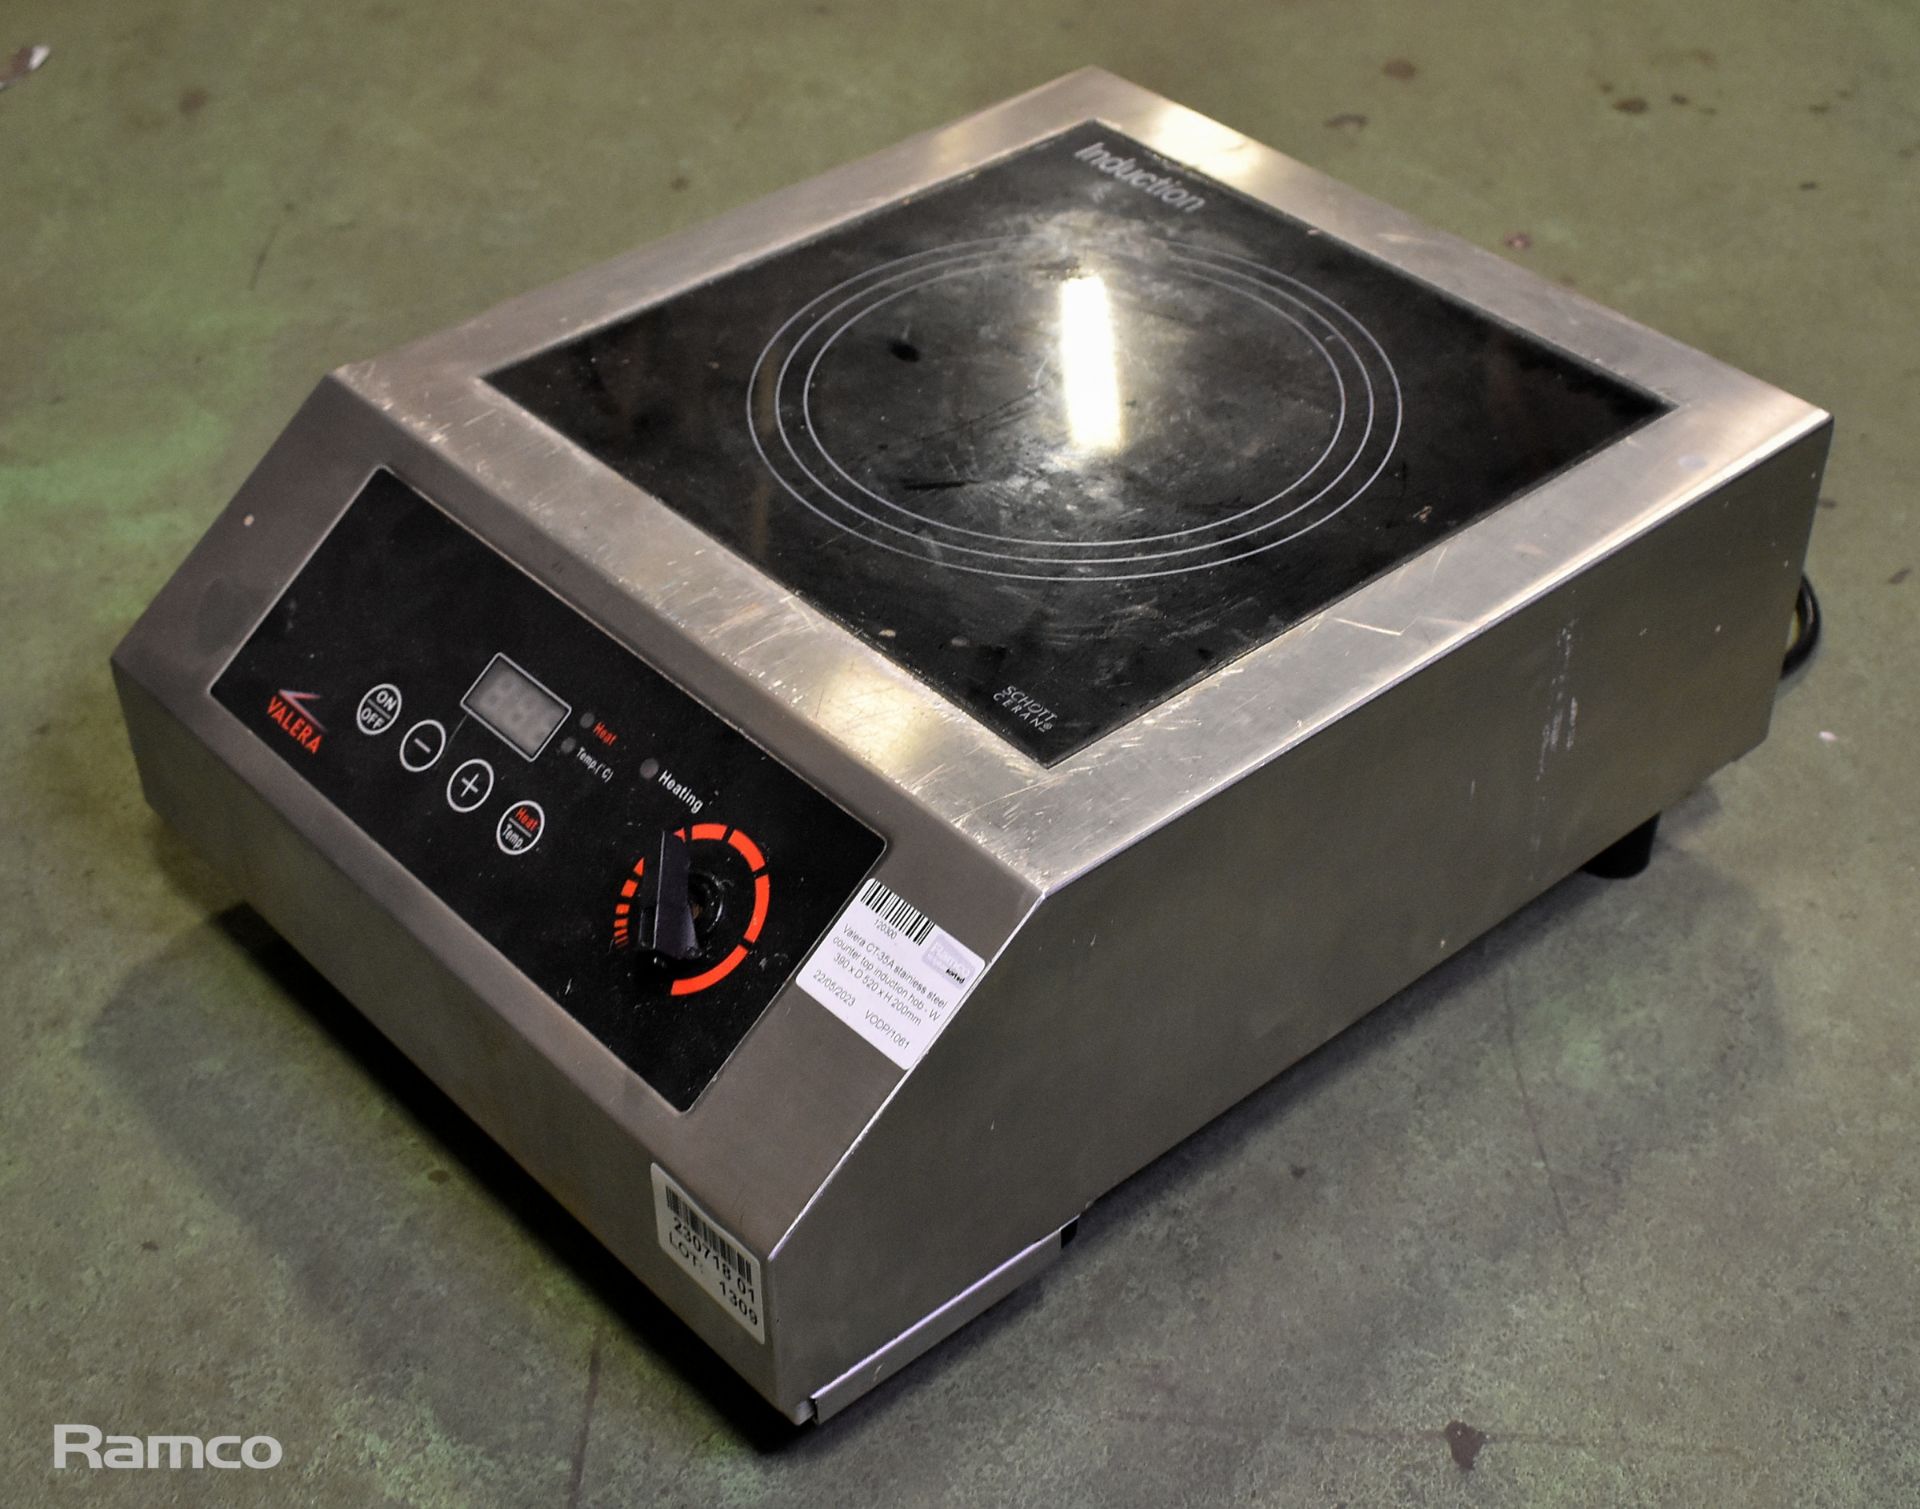 Valera CT-35A stainless steel counter top induction hob - W 390 x D 520 x H 200mm - Image 3 of 7